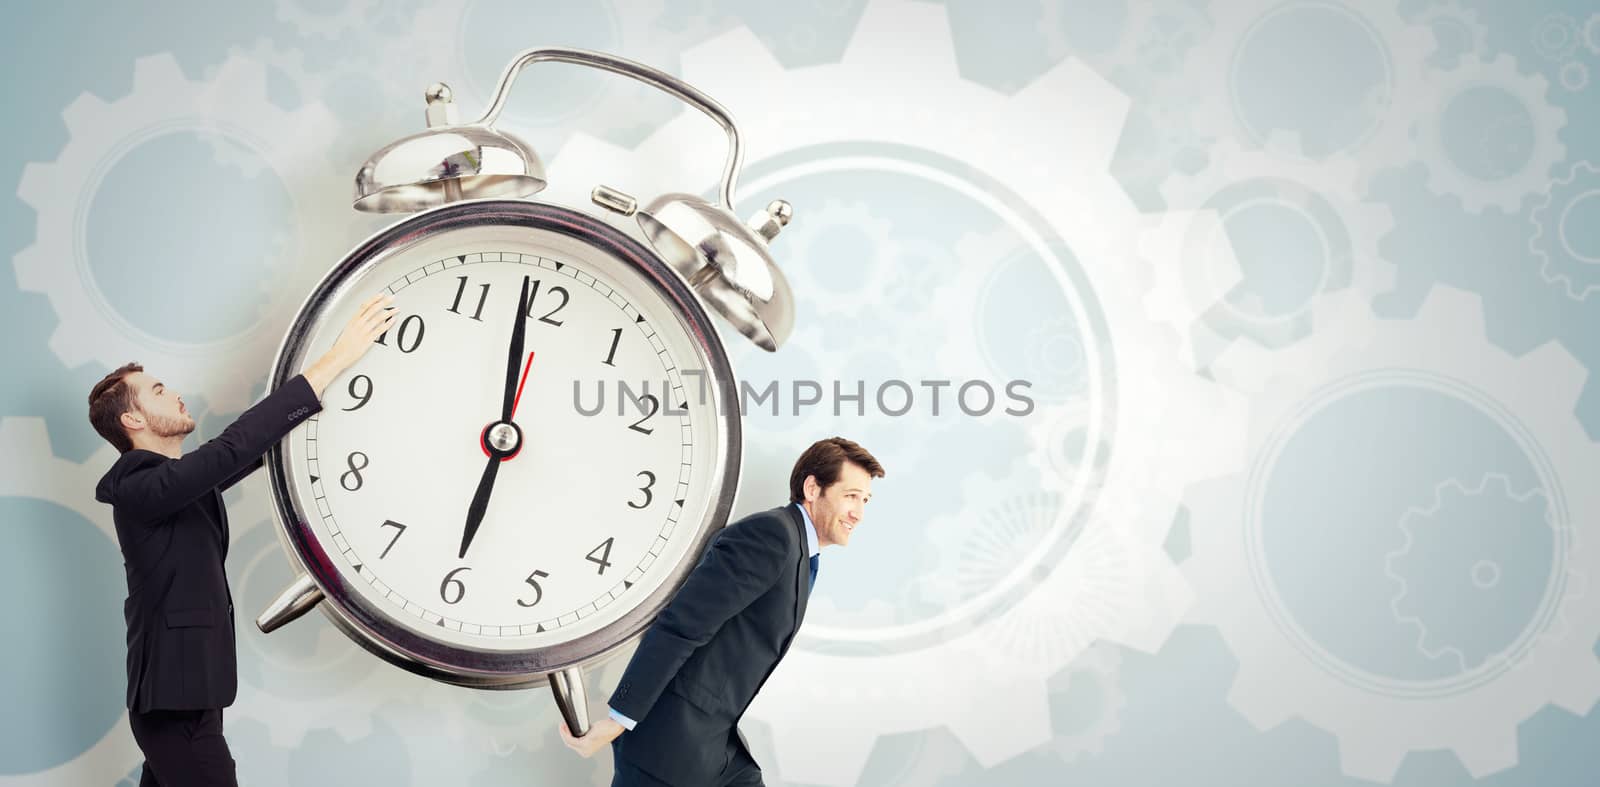 Businessman with arms raised catching something against white wheels and cogs on blue